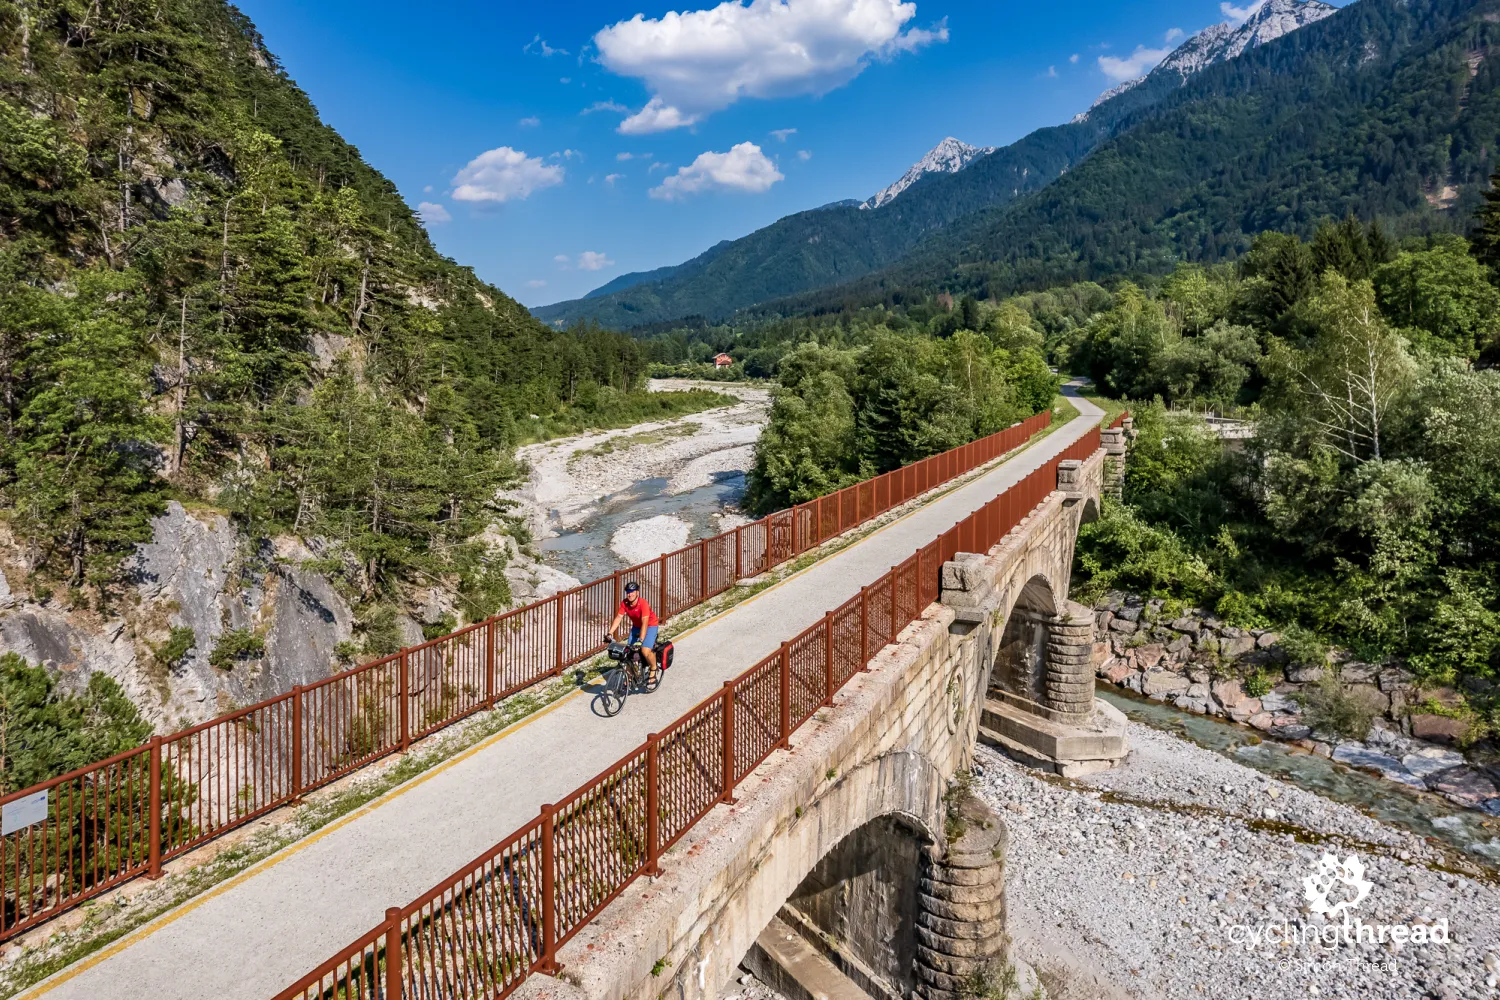 Former railway bridge on the Alpe-Adria route in Italy